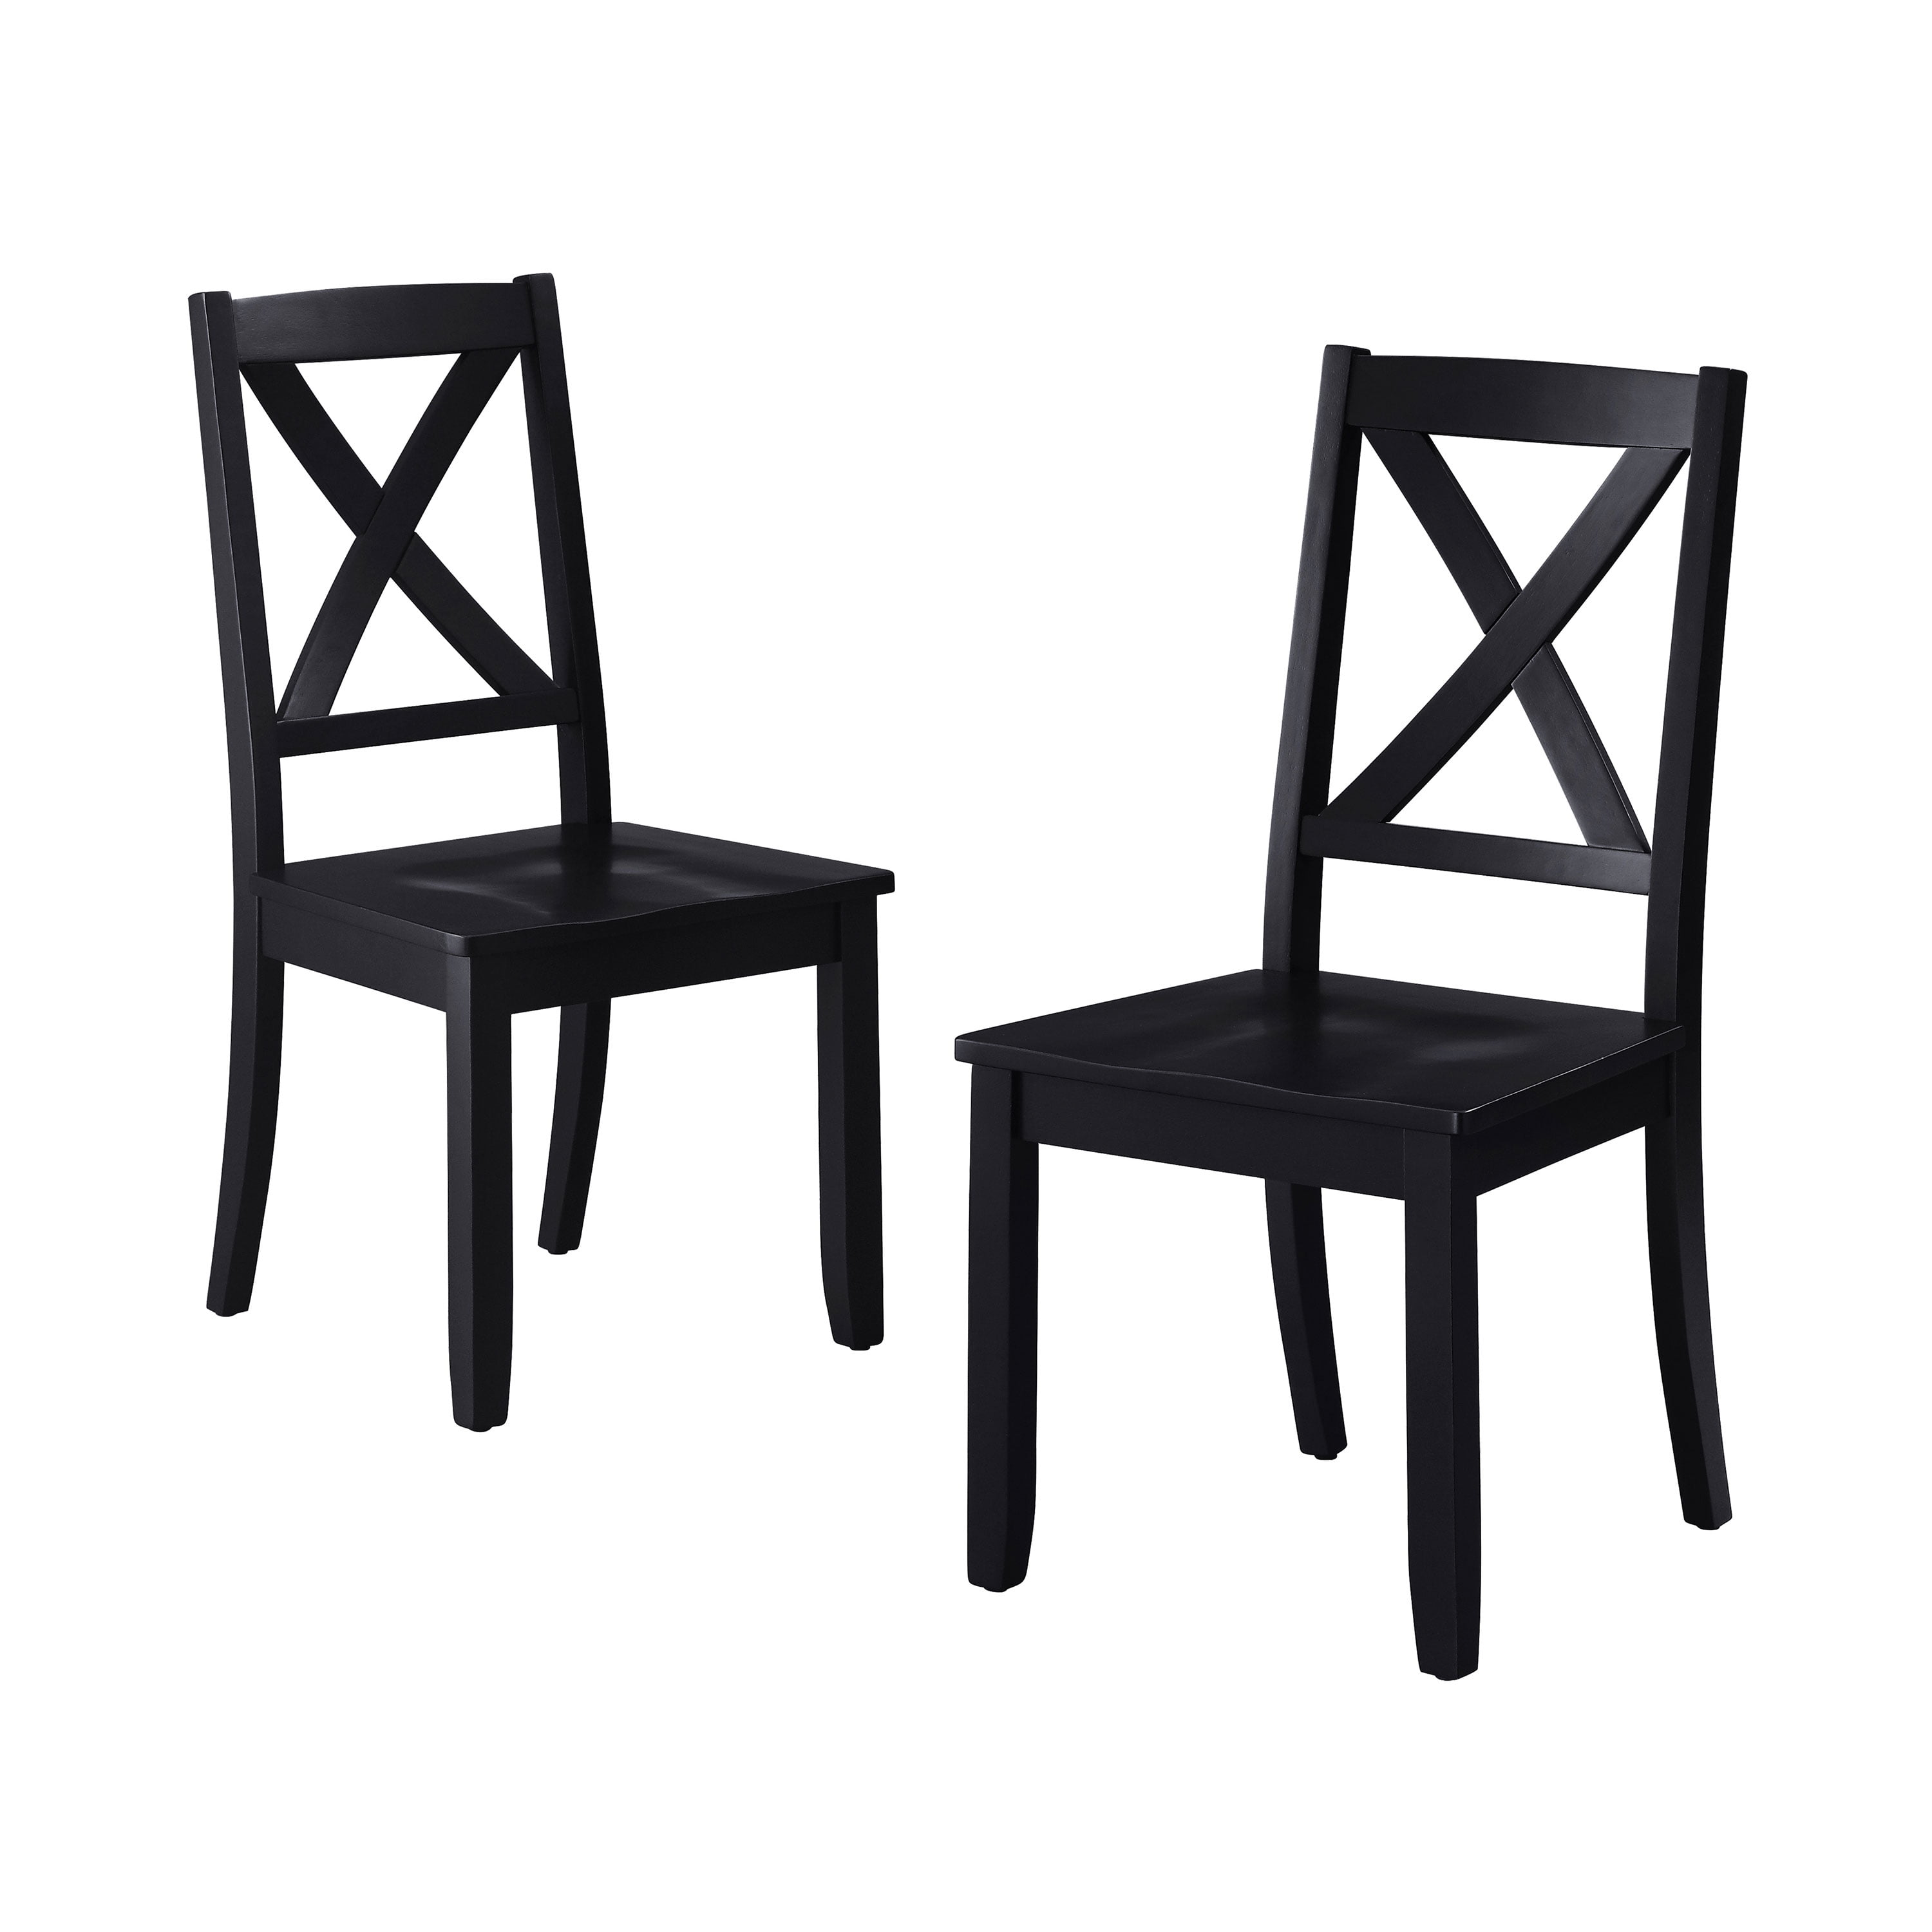 Better Homes and Gardens Maddox Crossing Dining Chair Bl W 